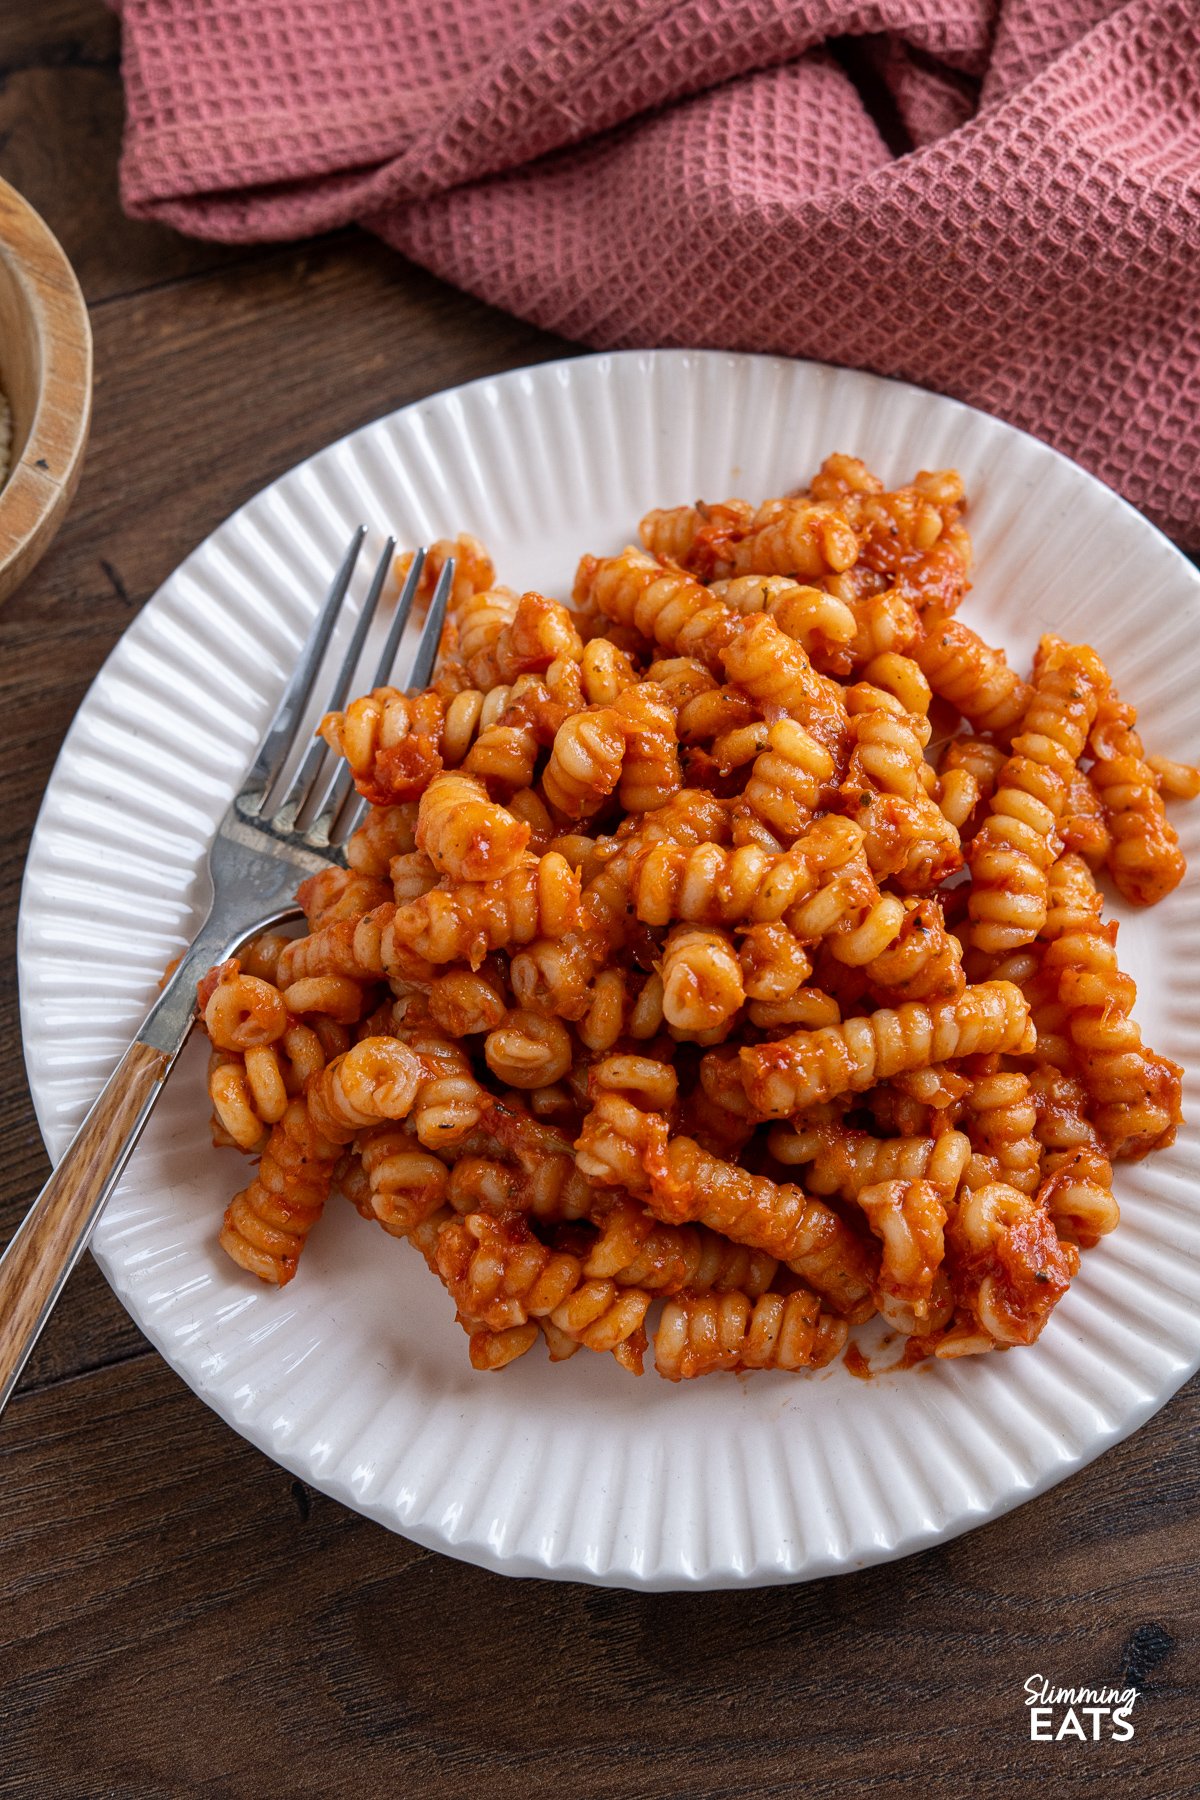 Pasta on a white/cream plate covered in the roasted tomato and garlic sauce, with a small wooden bowl of freshly grated Parmesan cheese in the background.